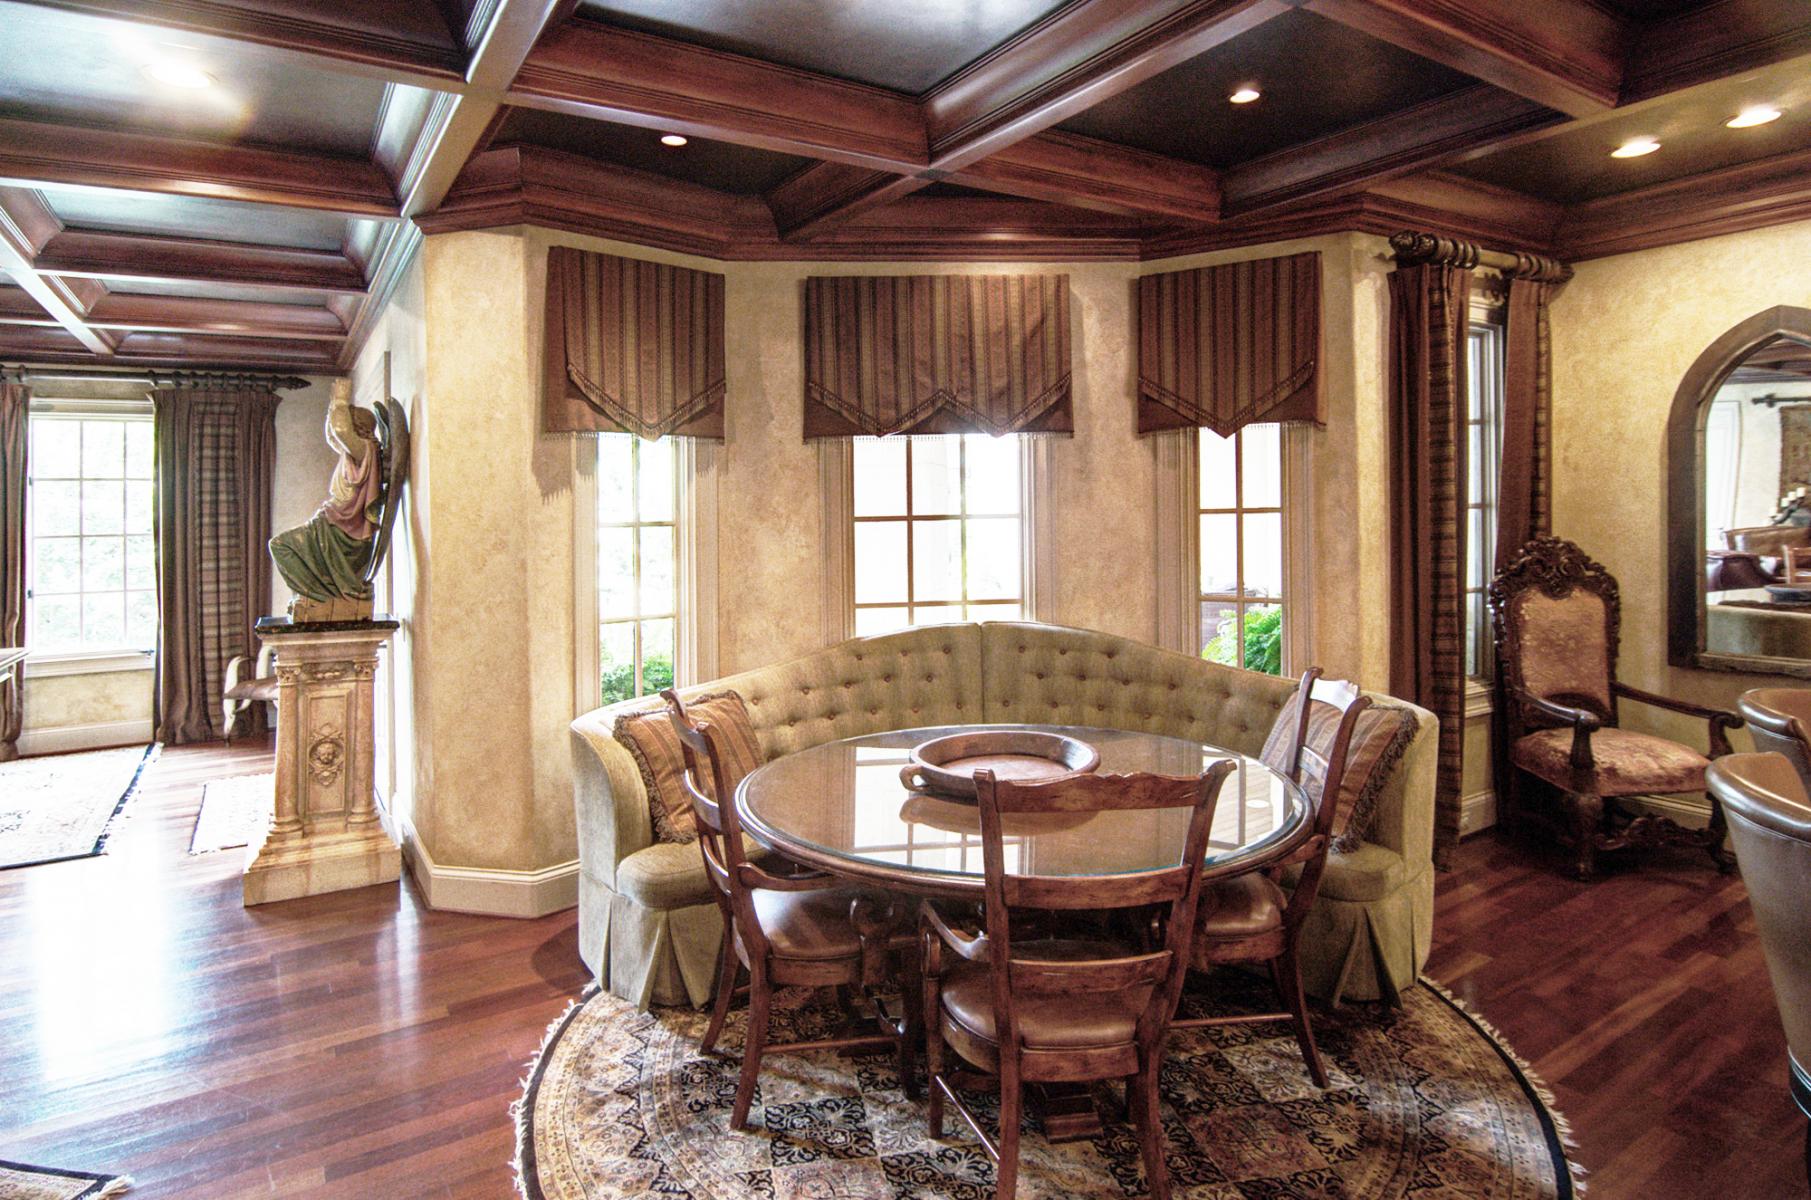 Wood grained coffer ceiling with  faux metal inserts and Tuscan colored plaster walls. Beautiful!